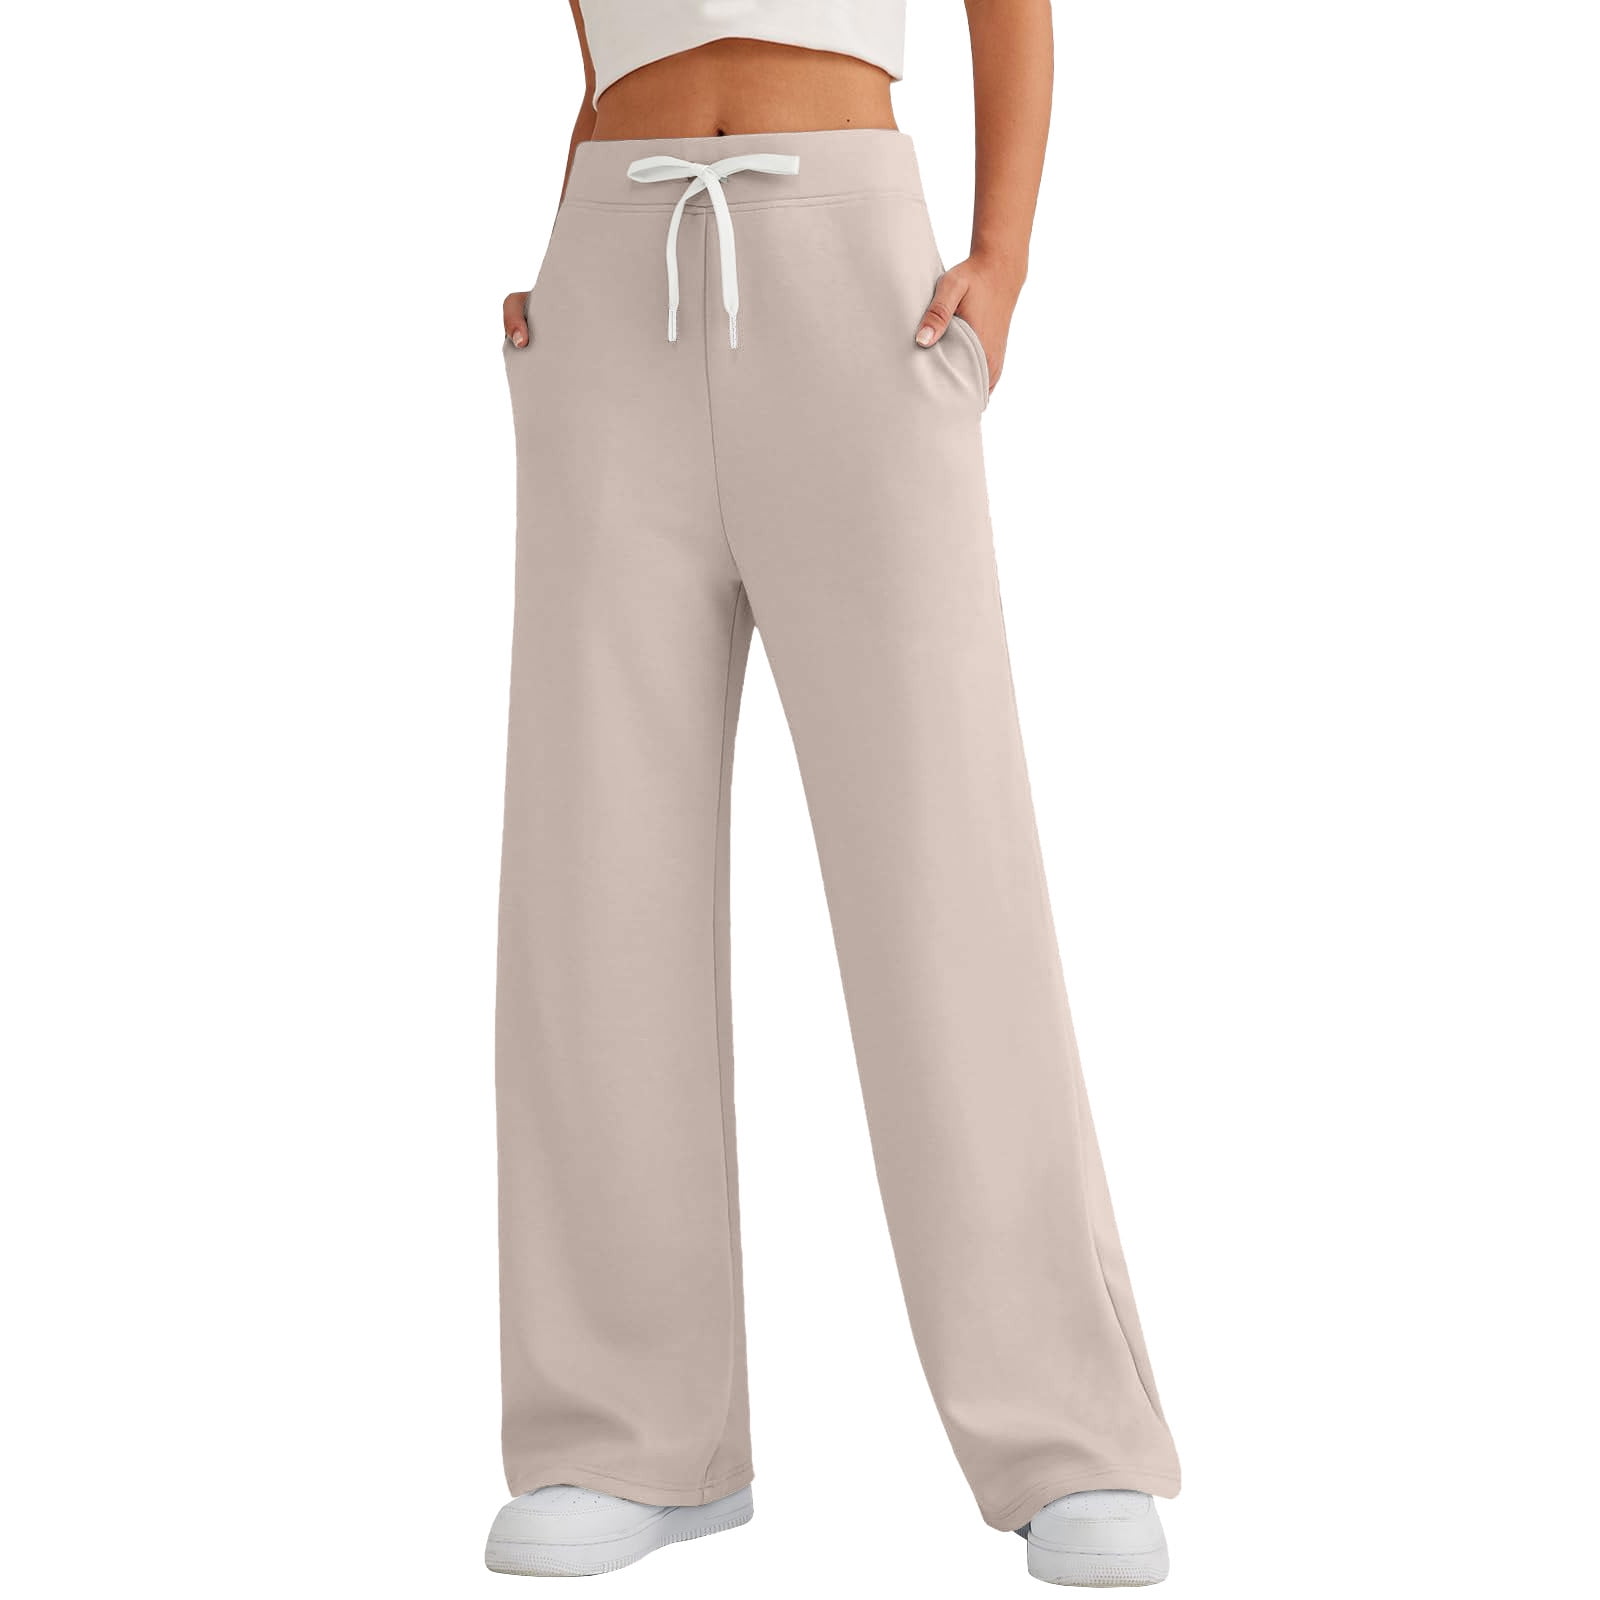 Susanny Sweatpants for Women with Pockets Baggy Petite Drawstring Lounge  Pants Fleece Lined Soft Straight Leg High Waisted Relaxed Sweatpants Khaki  2XL 